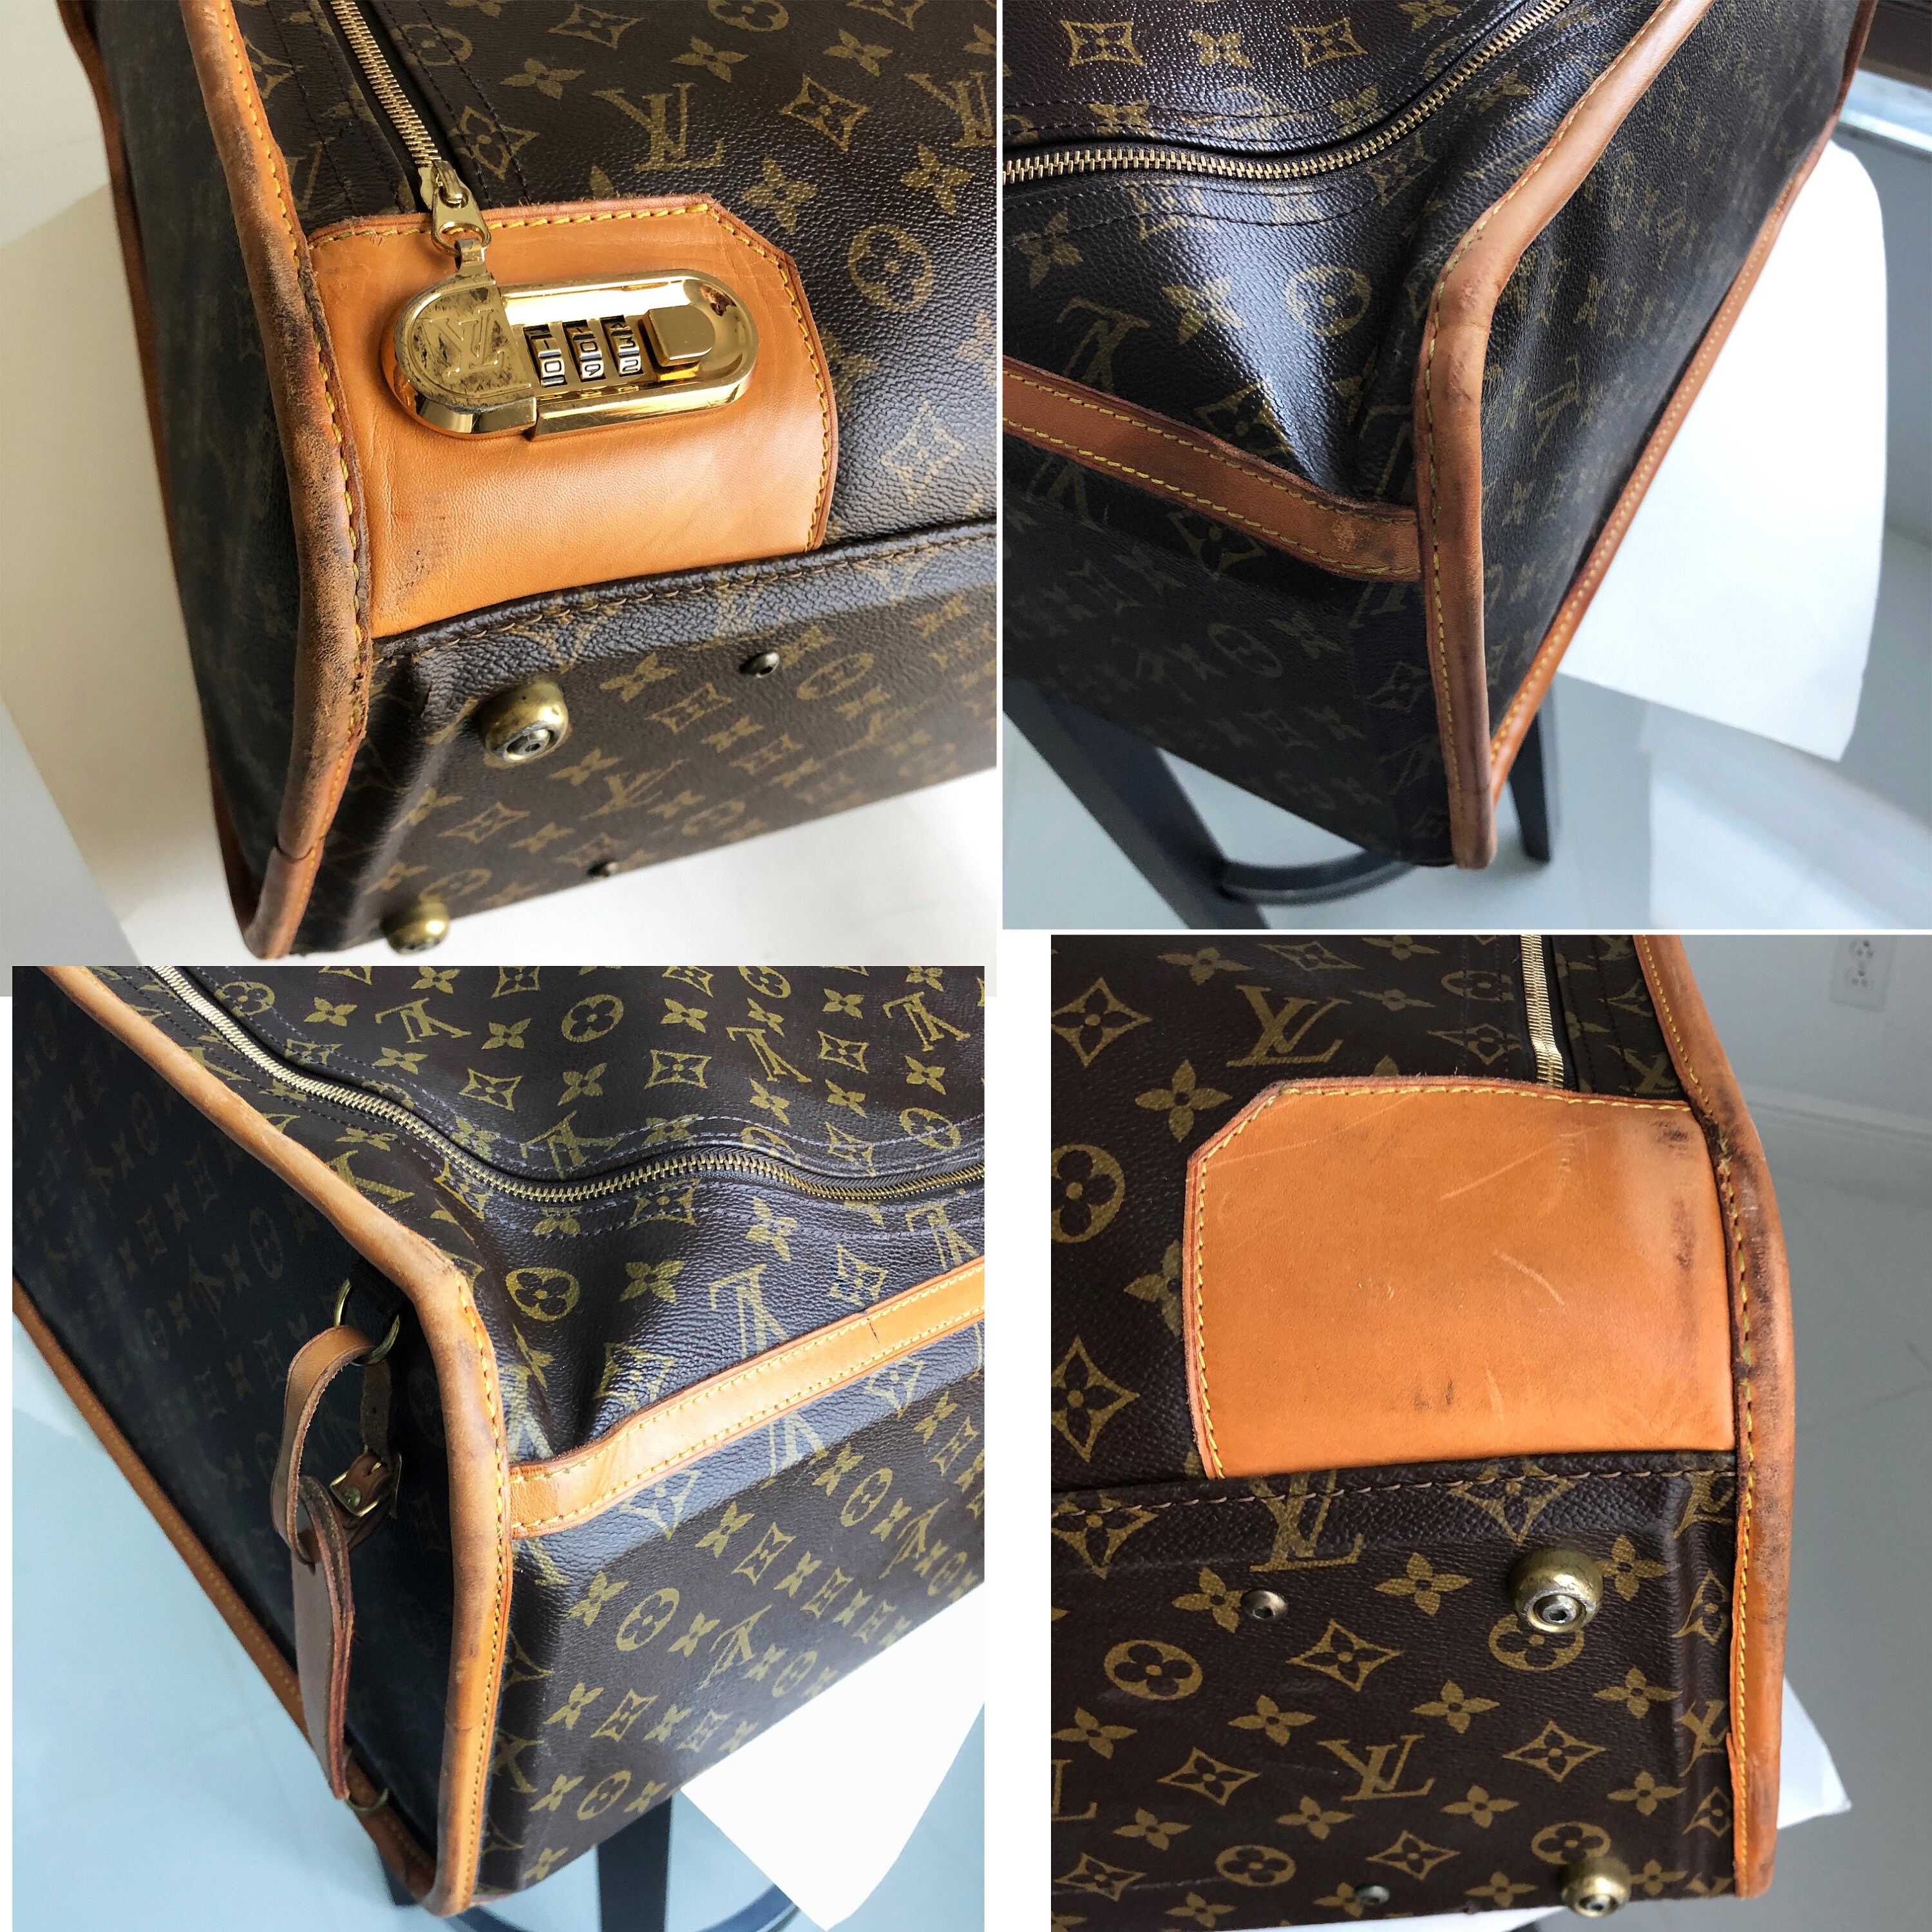 Buy Louis Vuitton Large Monogram Suitcase Luggage With Combination